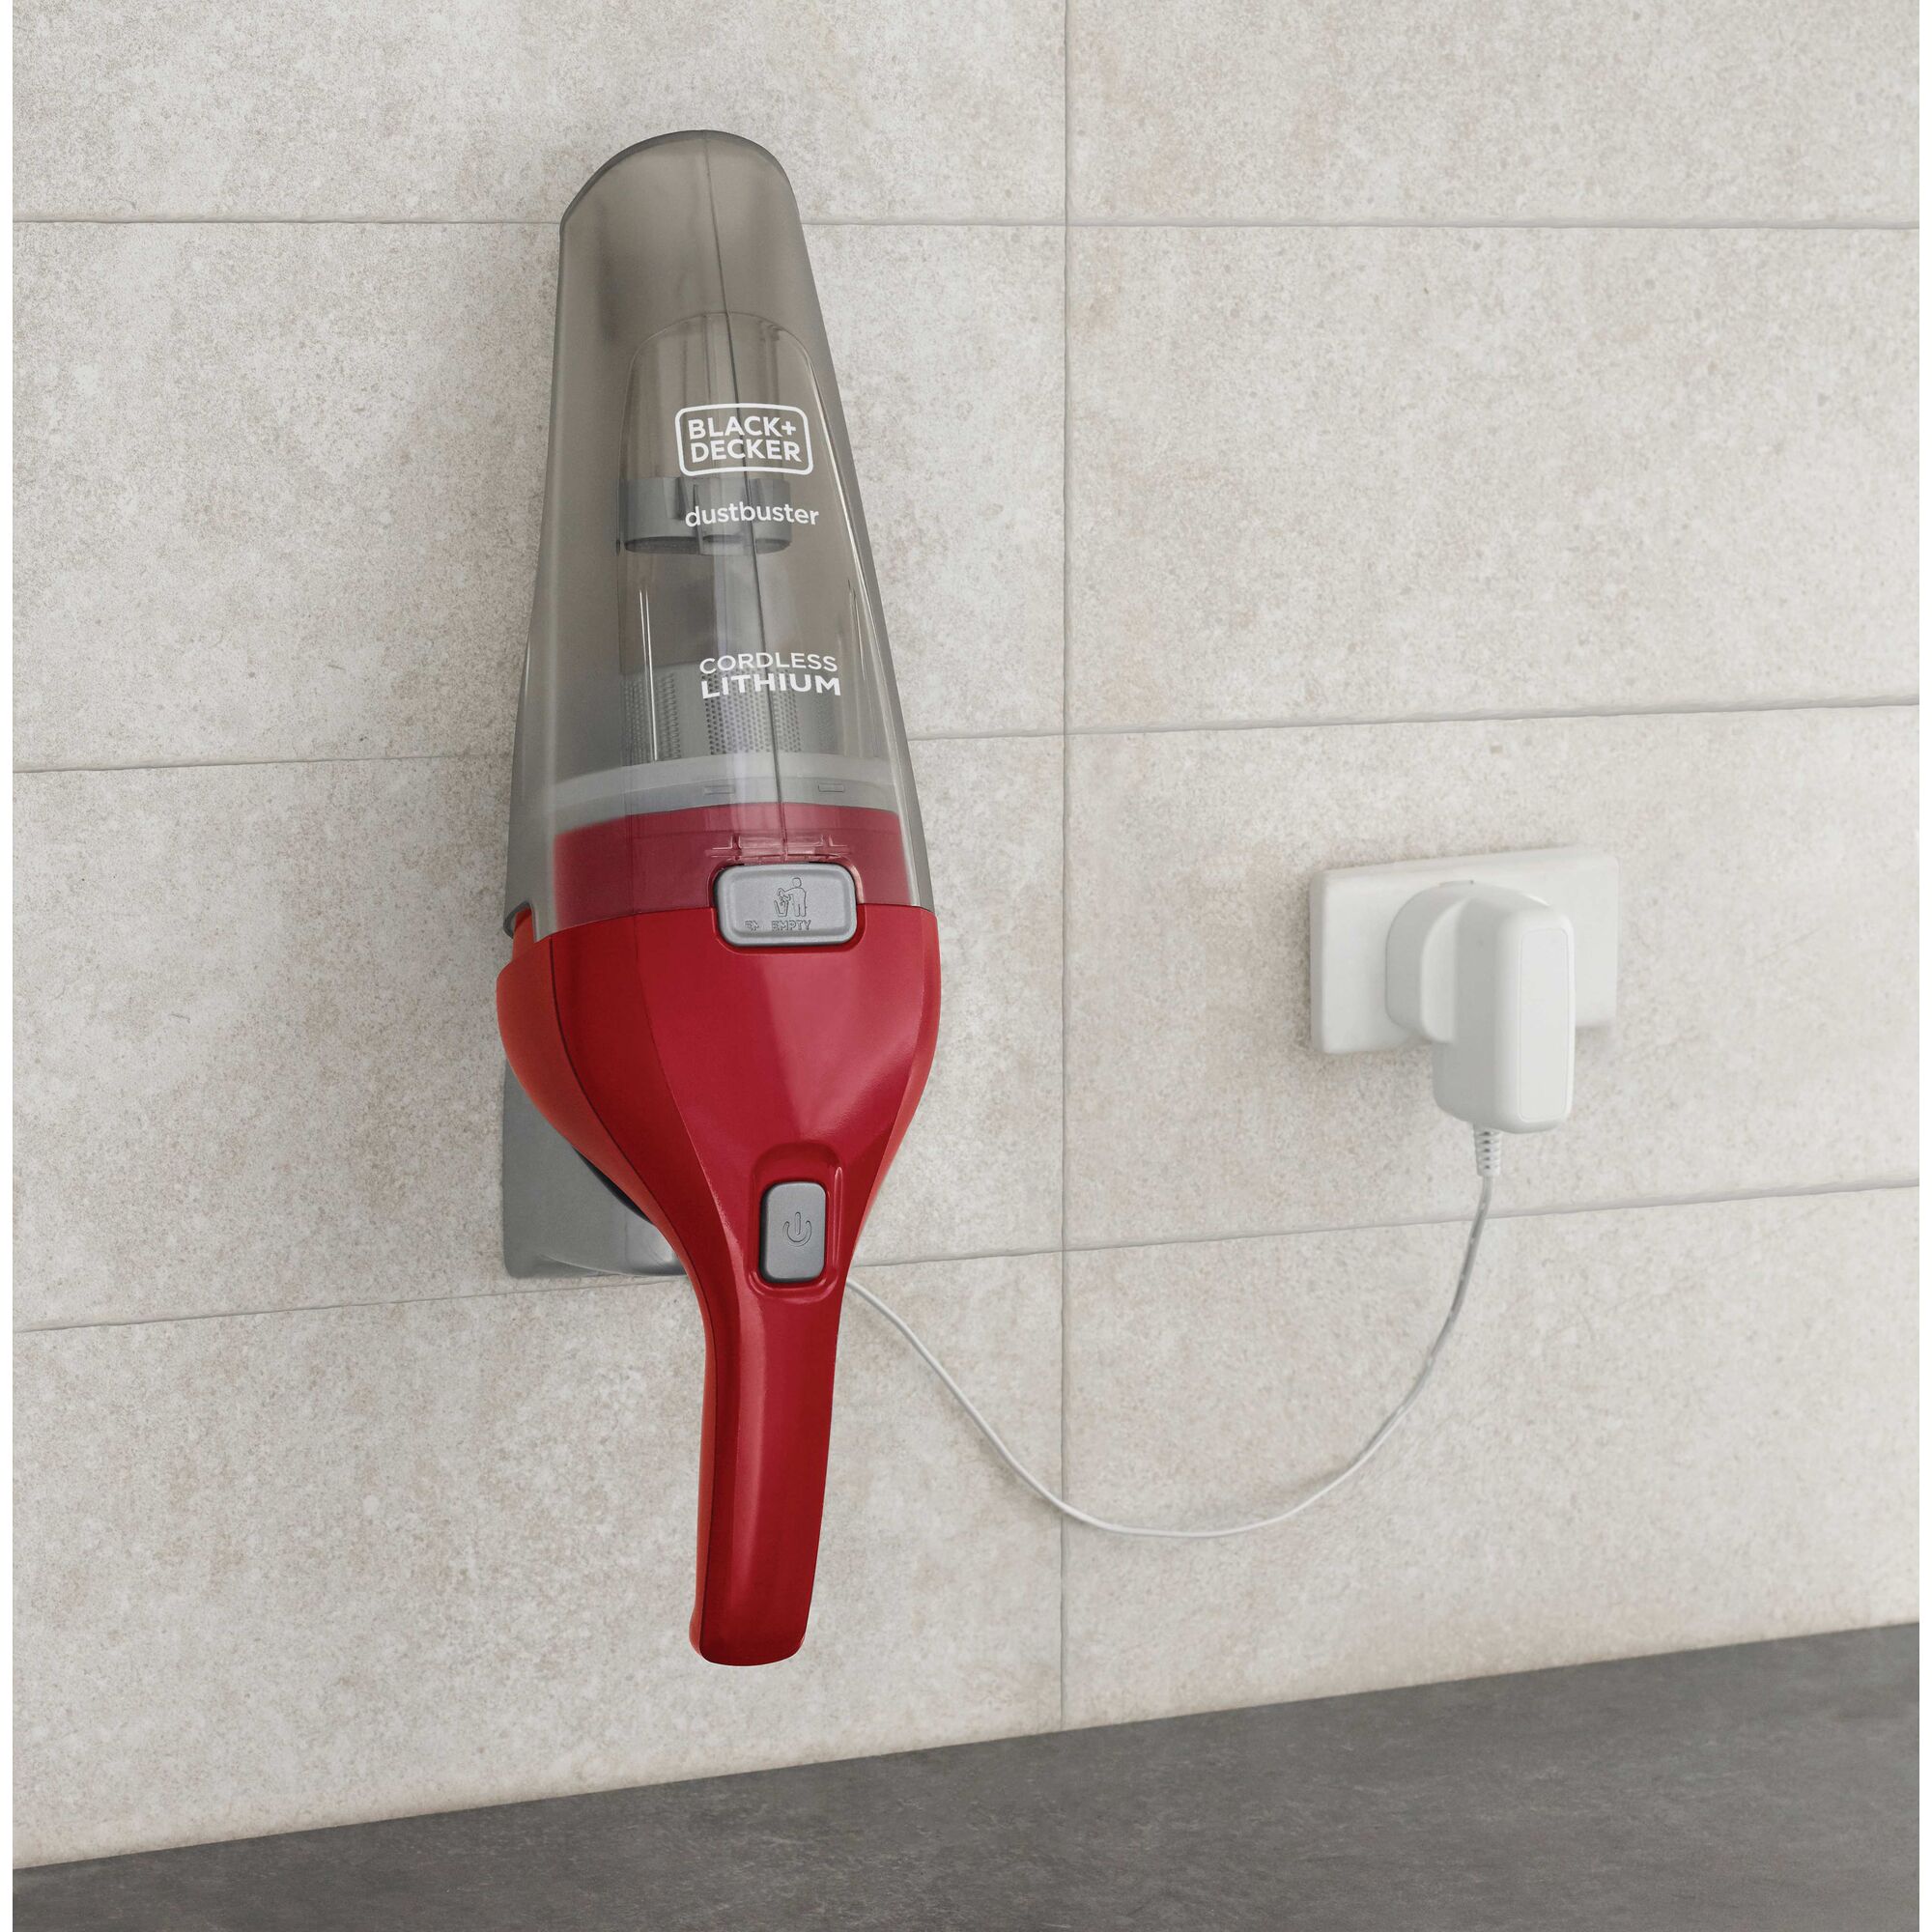 Wall mount charging feature of Dust buster Quick Clean Cordless Hand Vacuum.